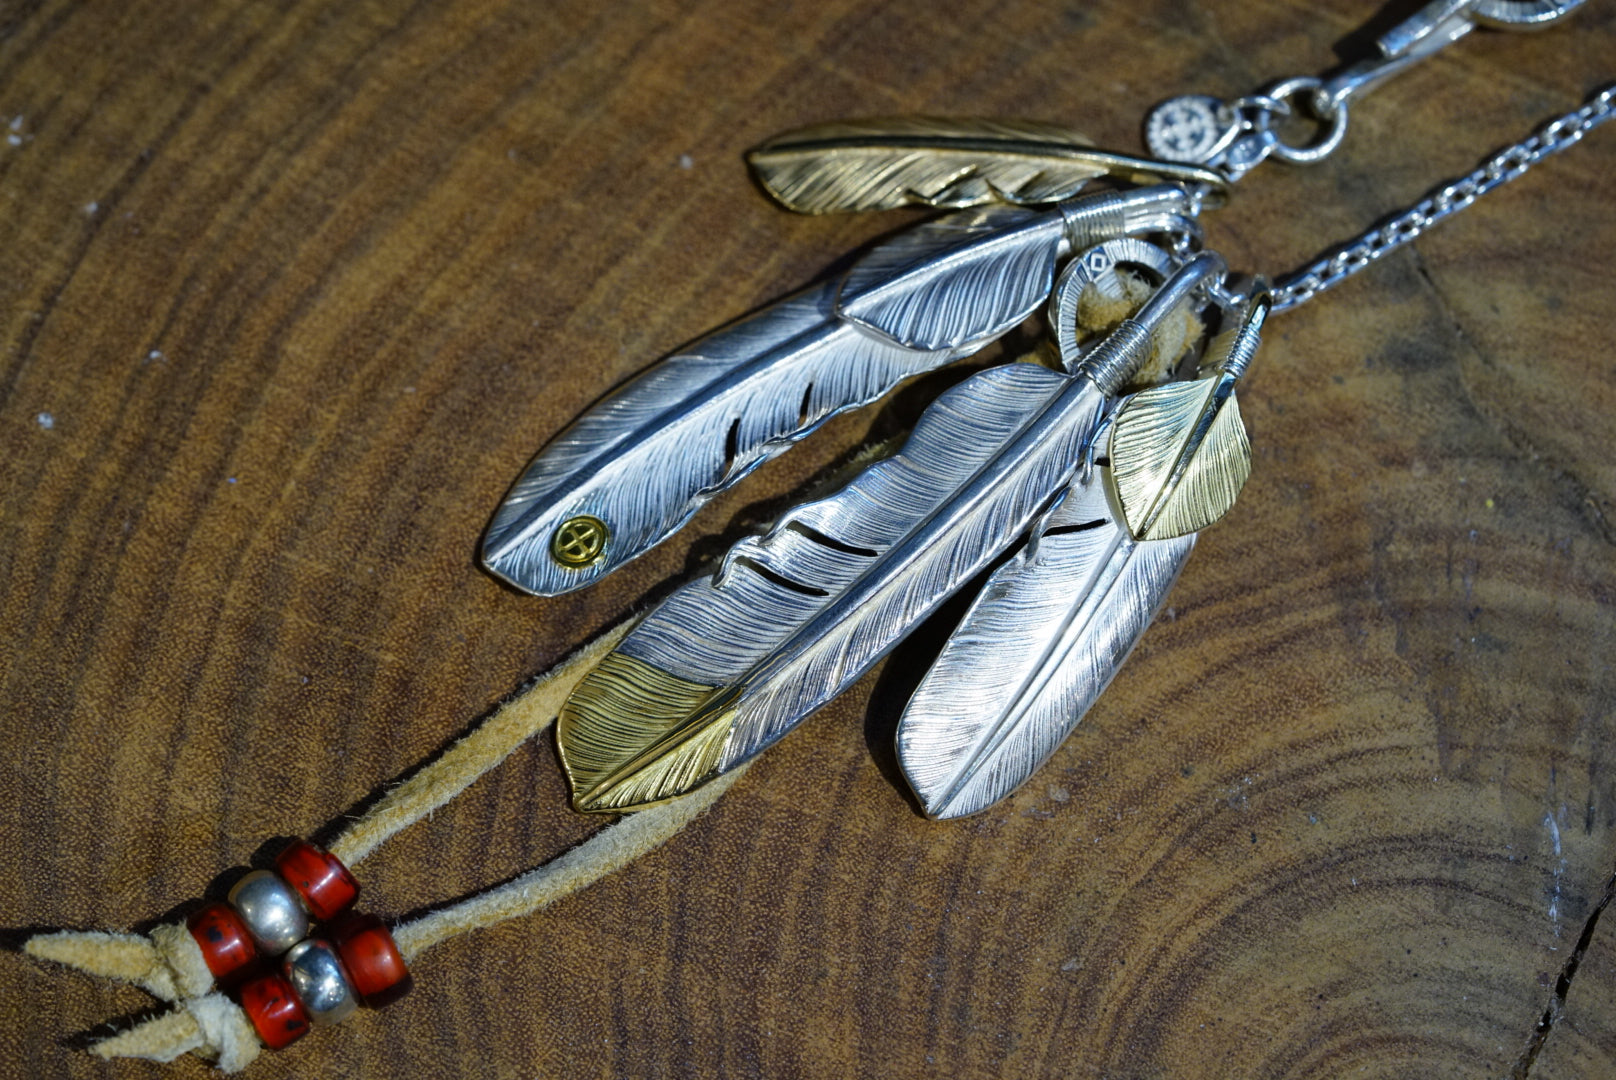 24Kt Top Silver Gold Point Feather Pendant L